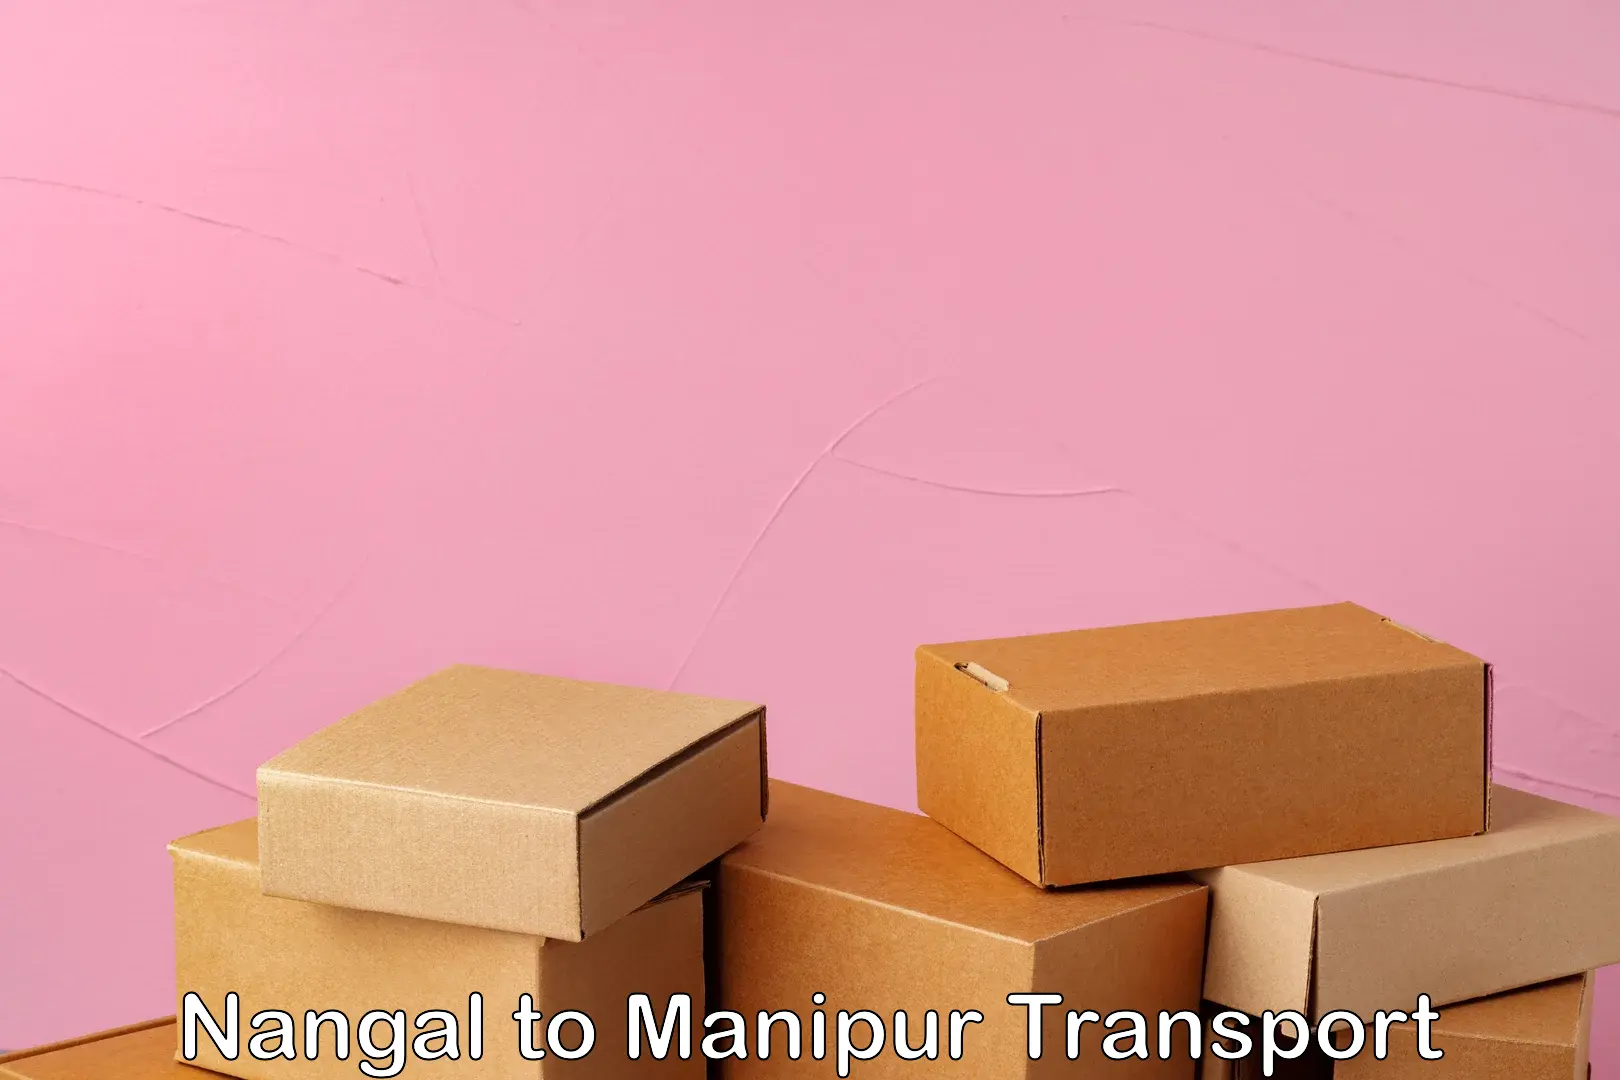 Nearby transport service Nangal to Manipur